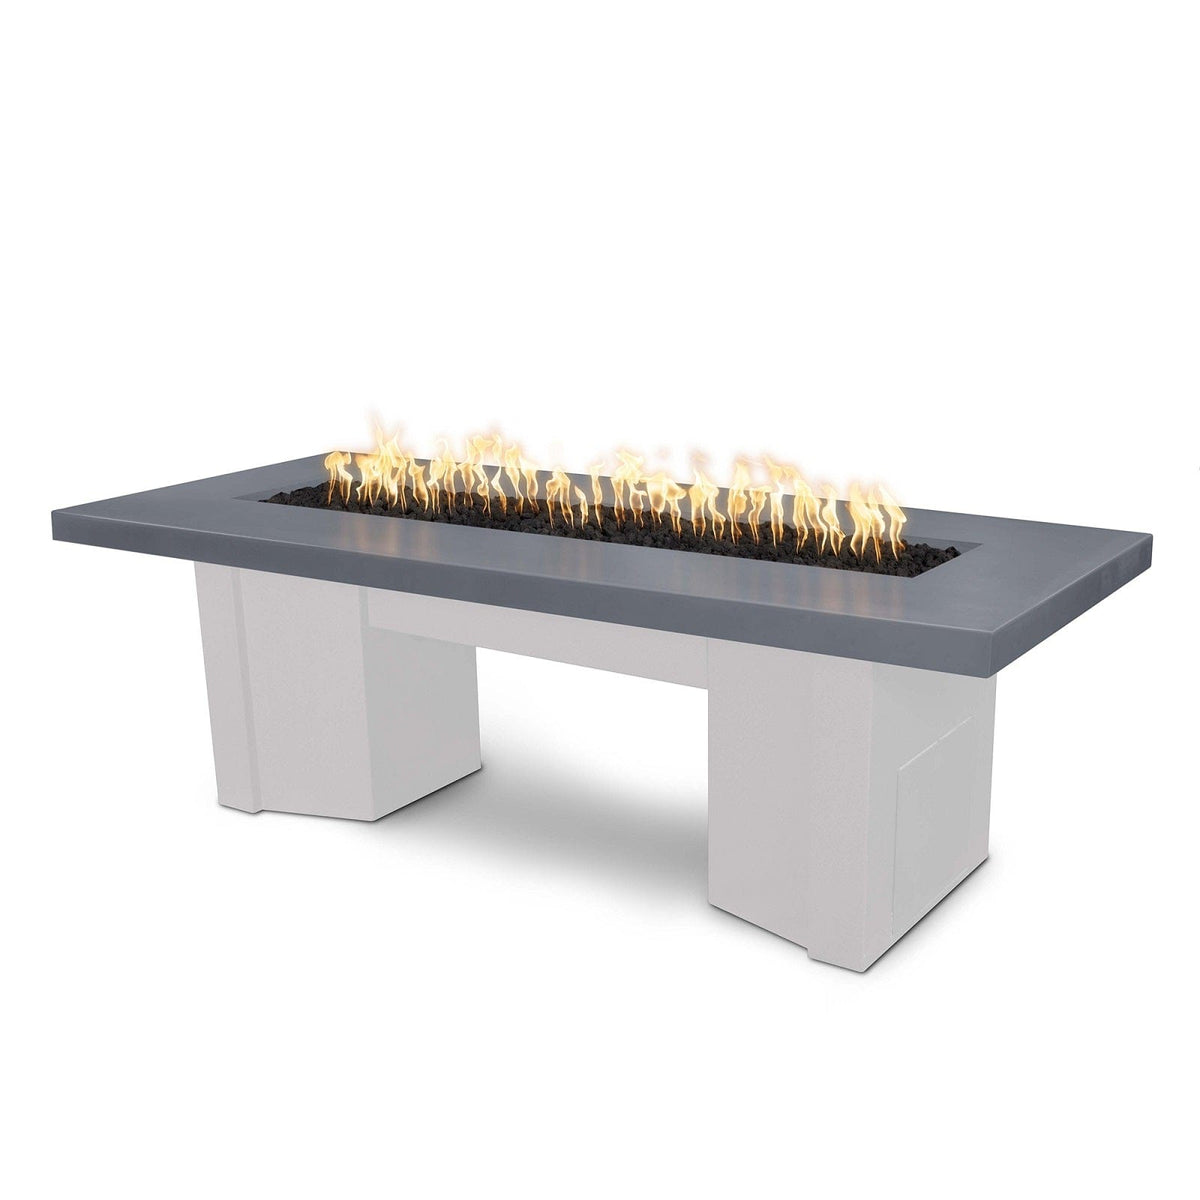 The Outdoor Plus Fire Features Gray (-GRY) / White Powder Coated Steel (-WHT) The Outdoor Plus 78&quot; Alameda Fire Table Smooth Concrete in Liquid Propane - Match Lit with Flame Sense System / OPT-ALMGFRC78FSML-LP